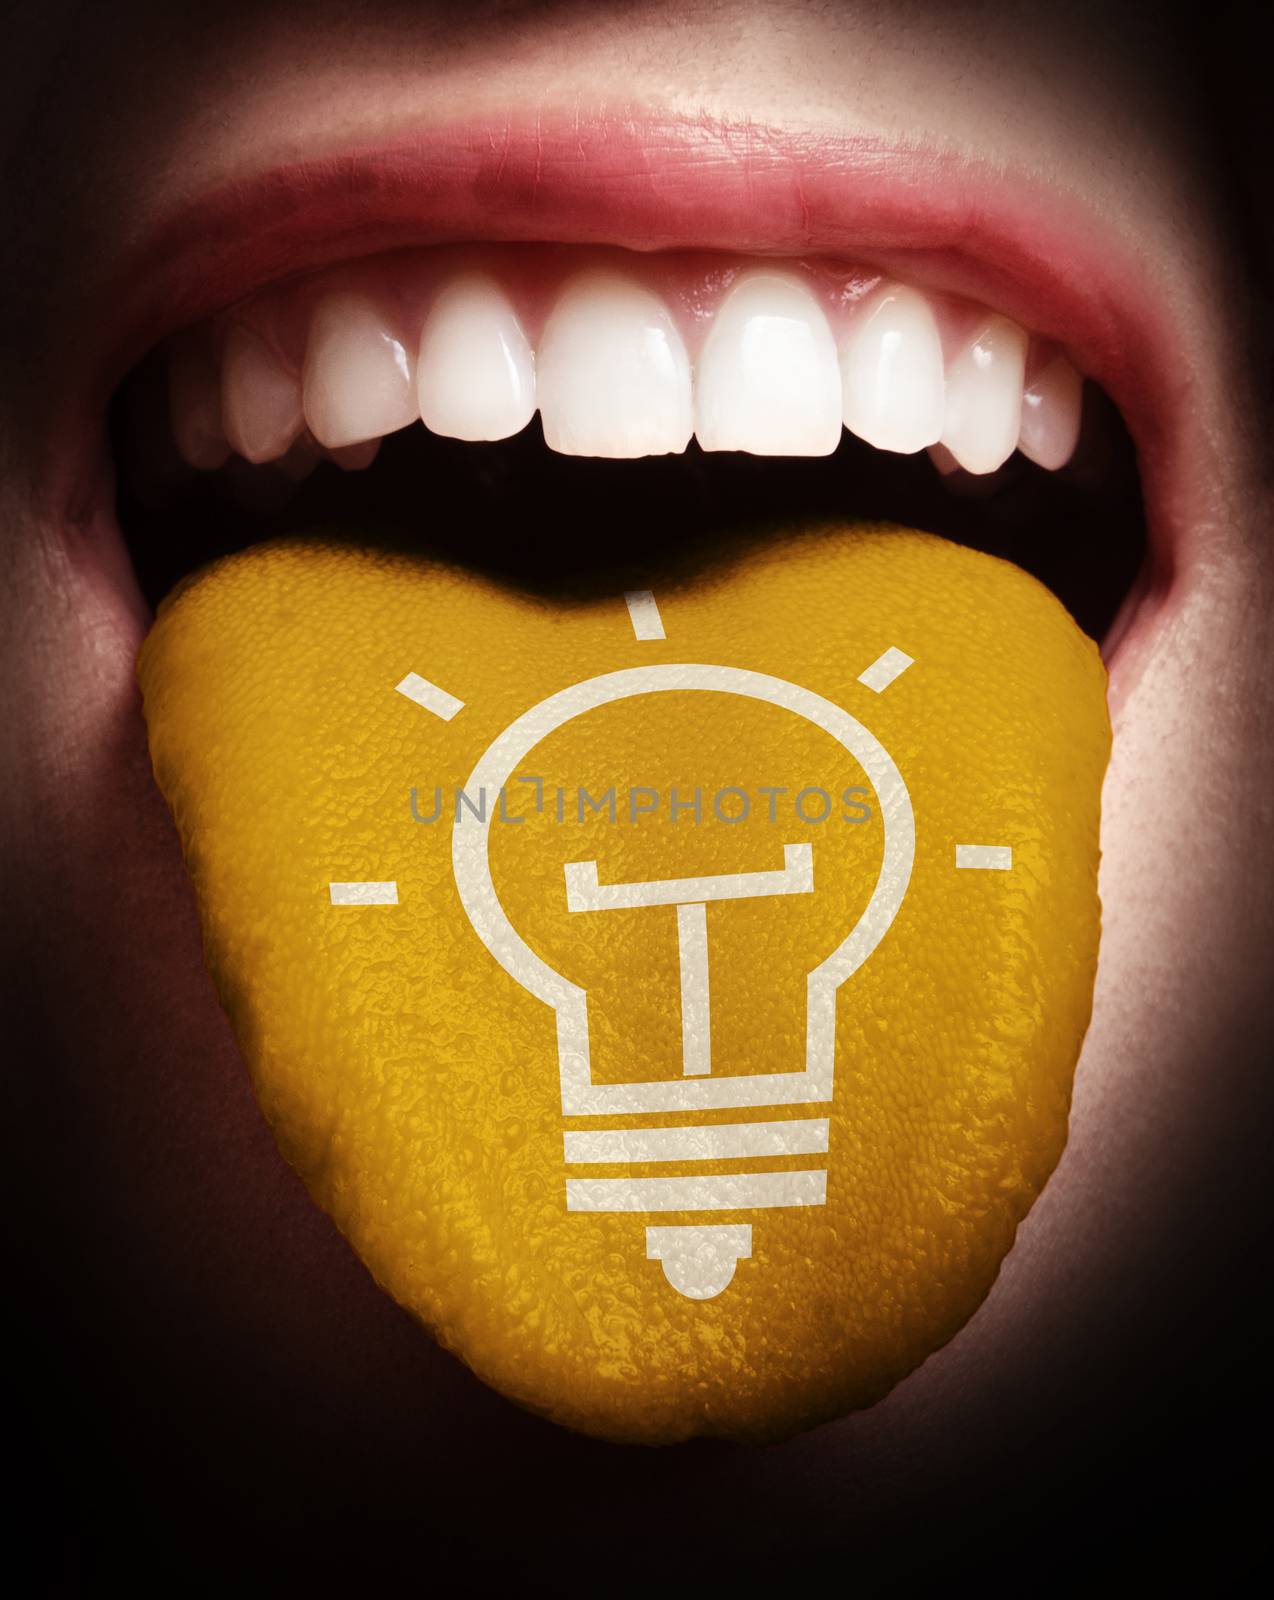 woman with open mouth spreading tongue colored in blue and lightbulb as concept